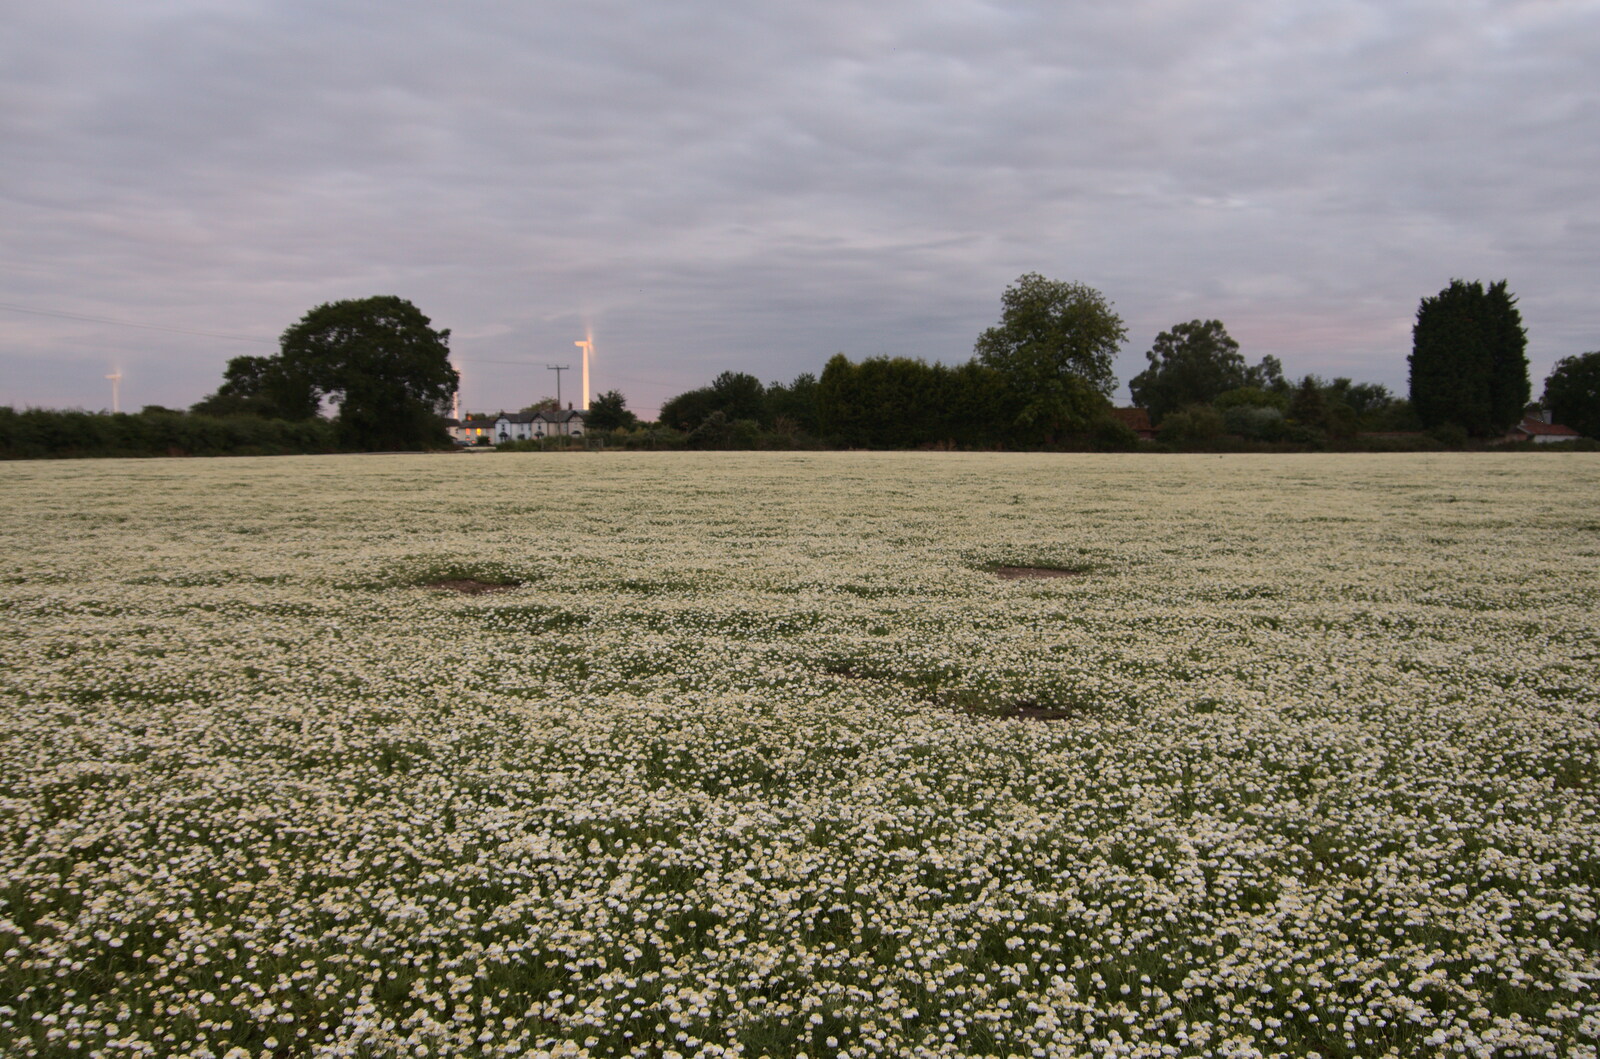 A field of chamomile at night from Lockdown Bike Rides and an Anniversary Picnic, Mellis and Brome, Suffolk - 3rd July 2020